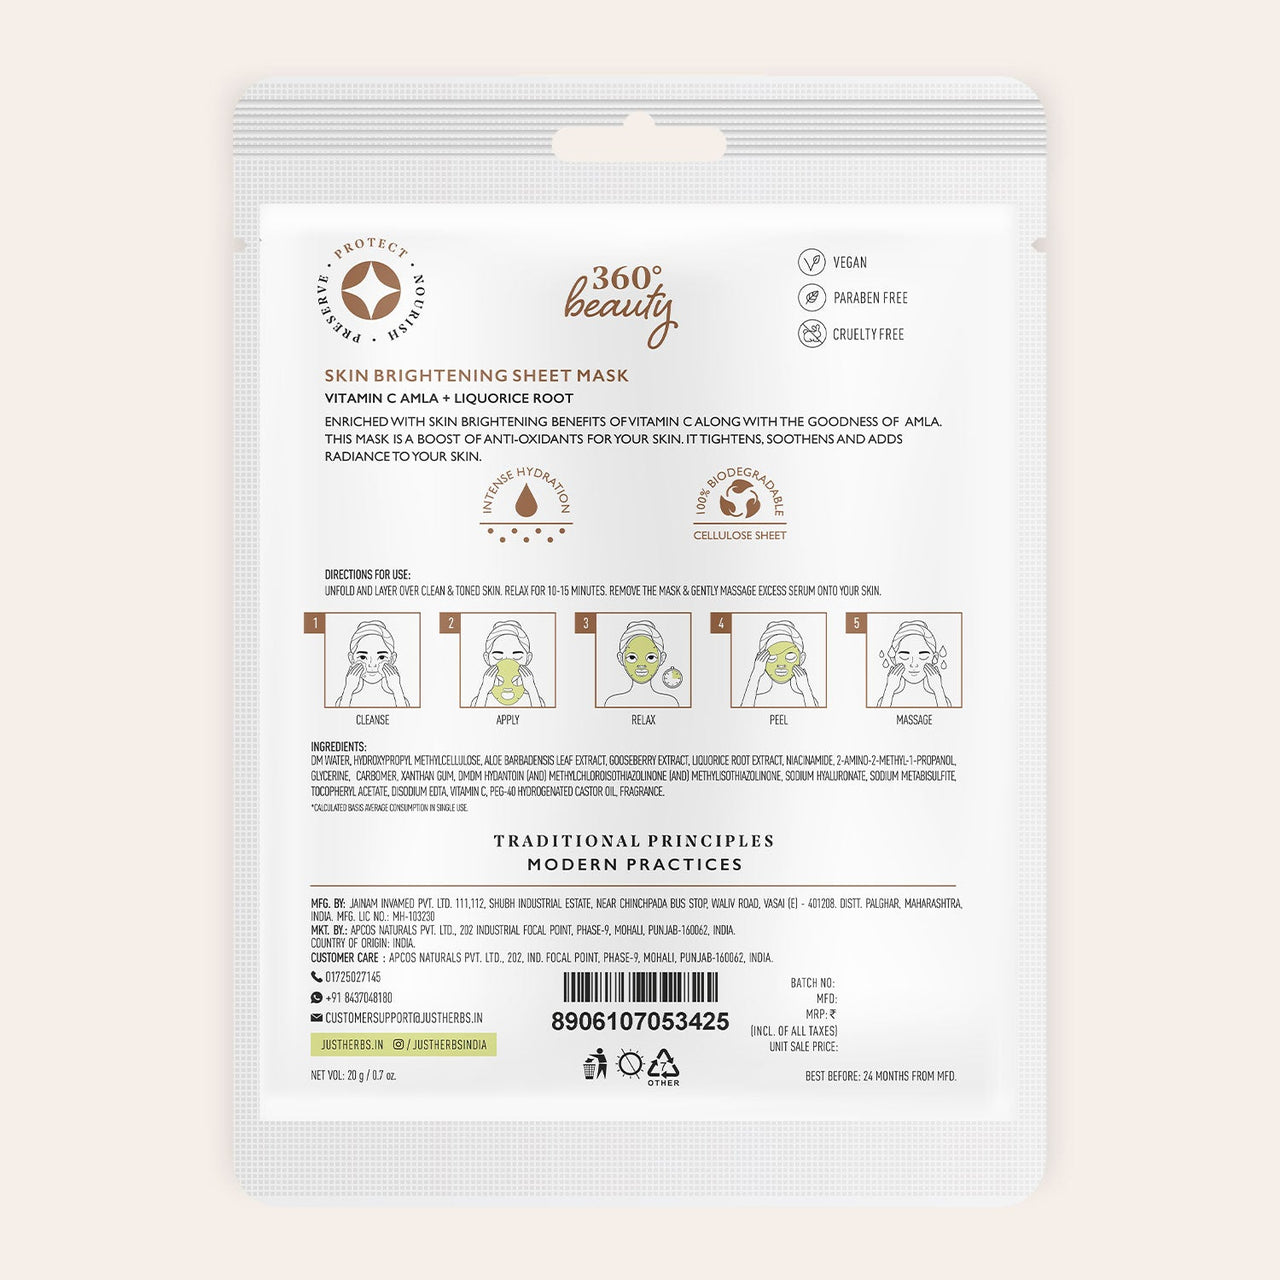 Vitamin C Amla Sheet Mask with Liquorice Root for Skin Brightening Pack of 1